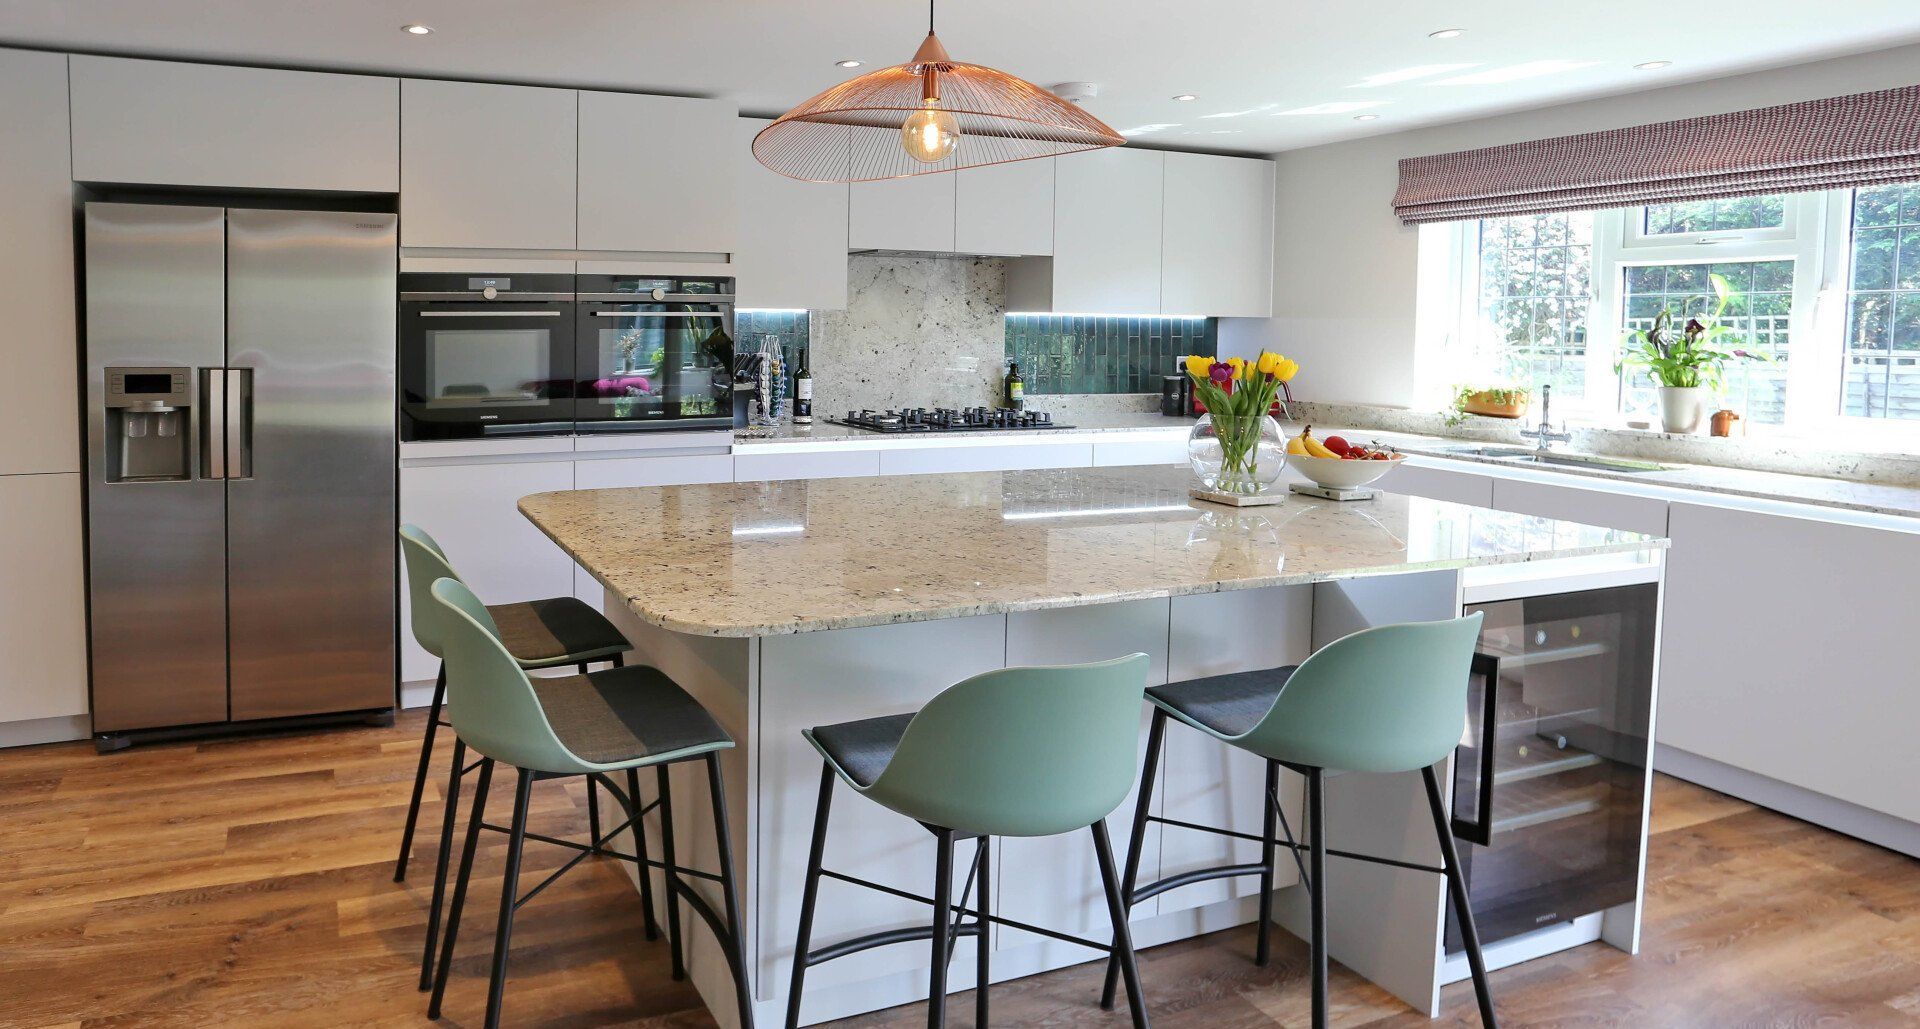 Kitchen island with seating area and a built-in wine fridge by exact by exact